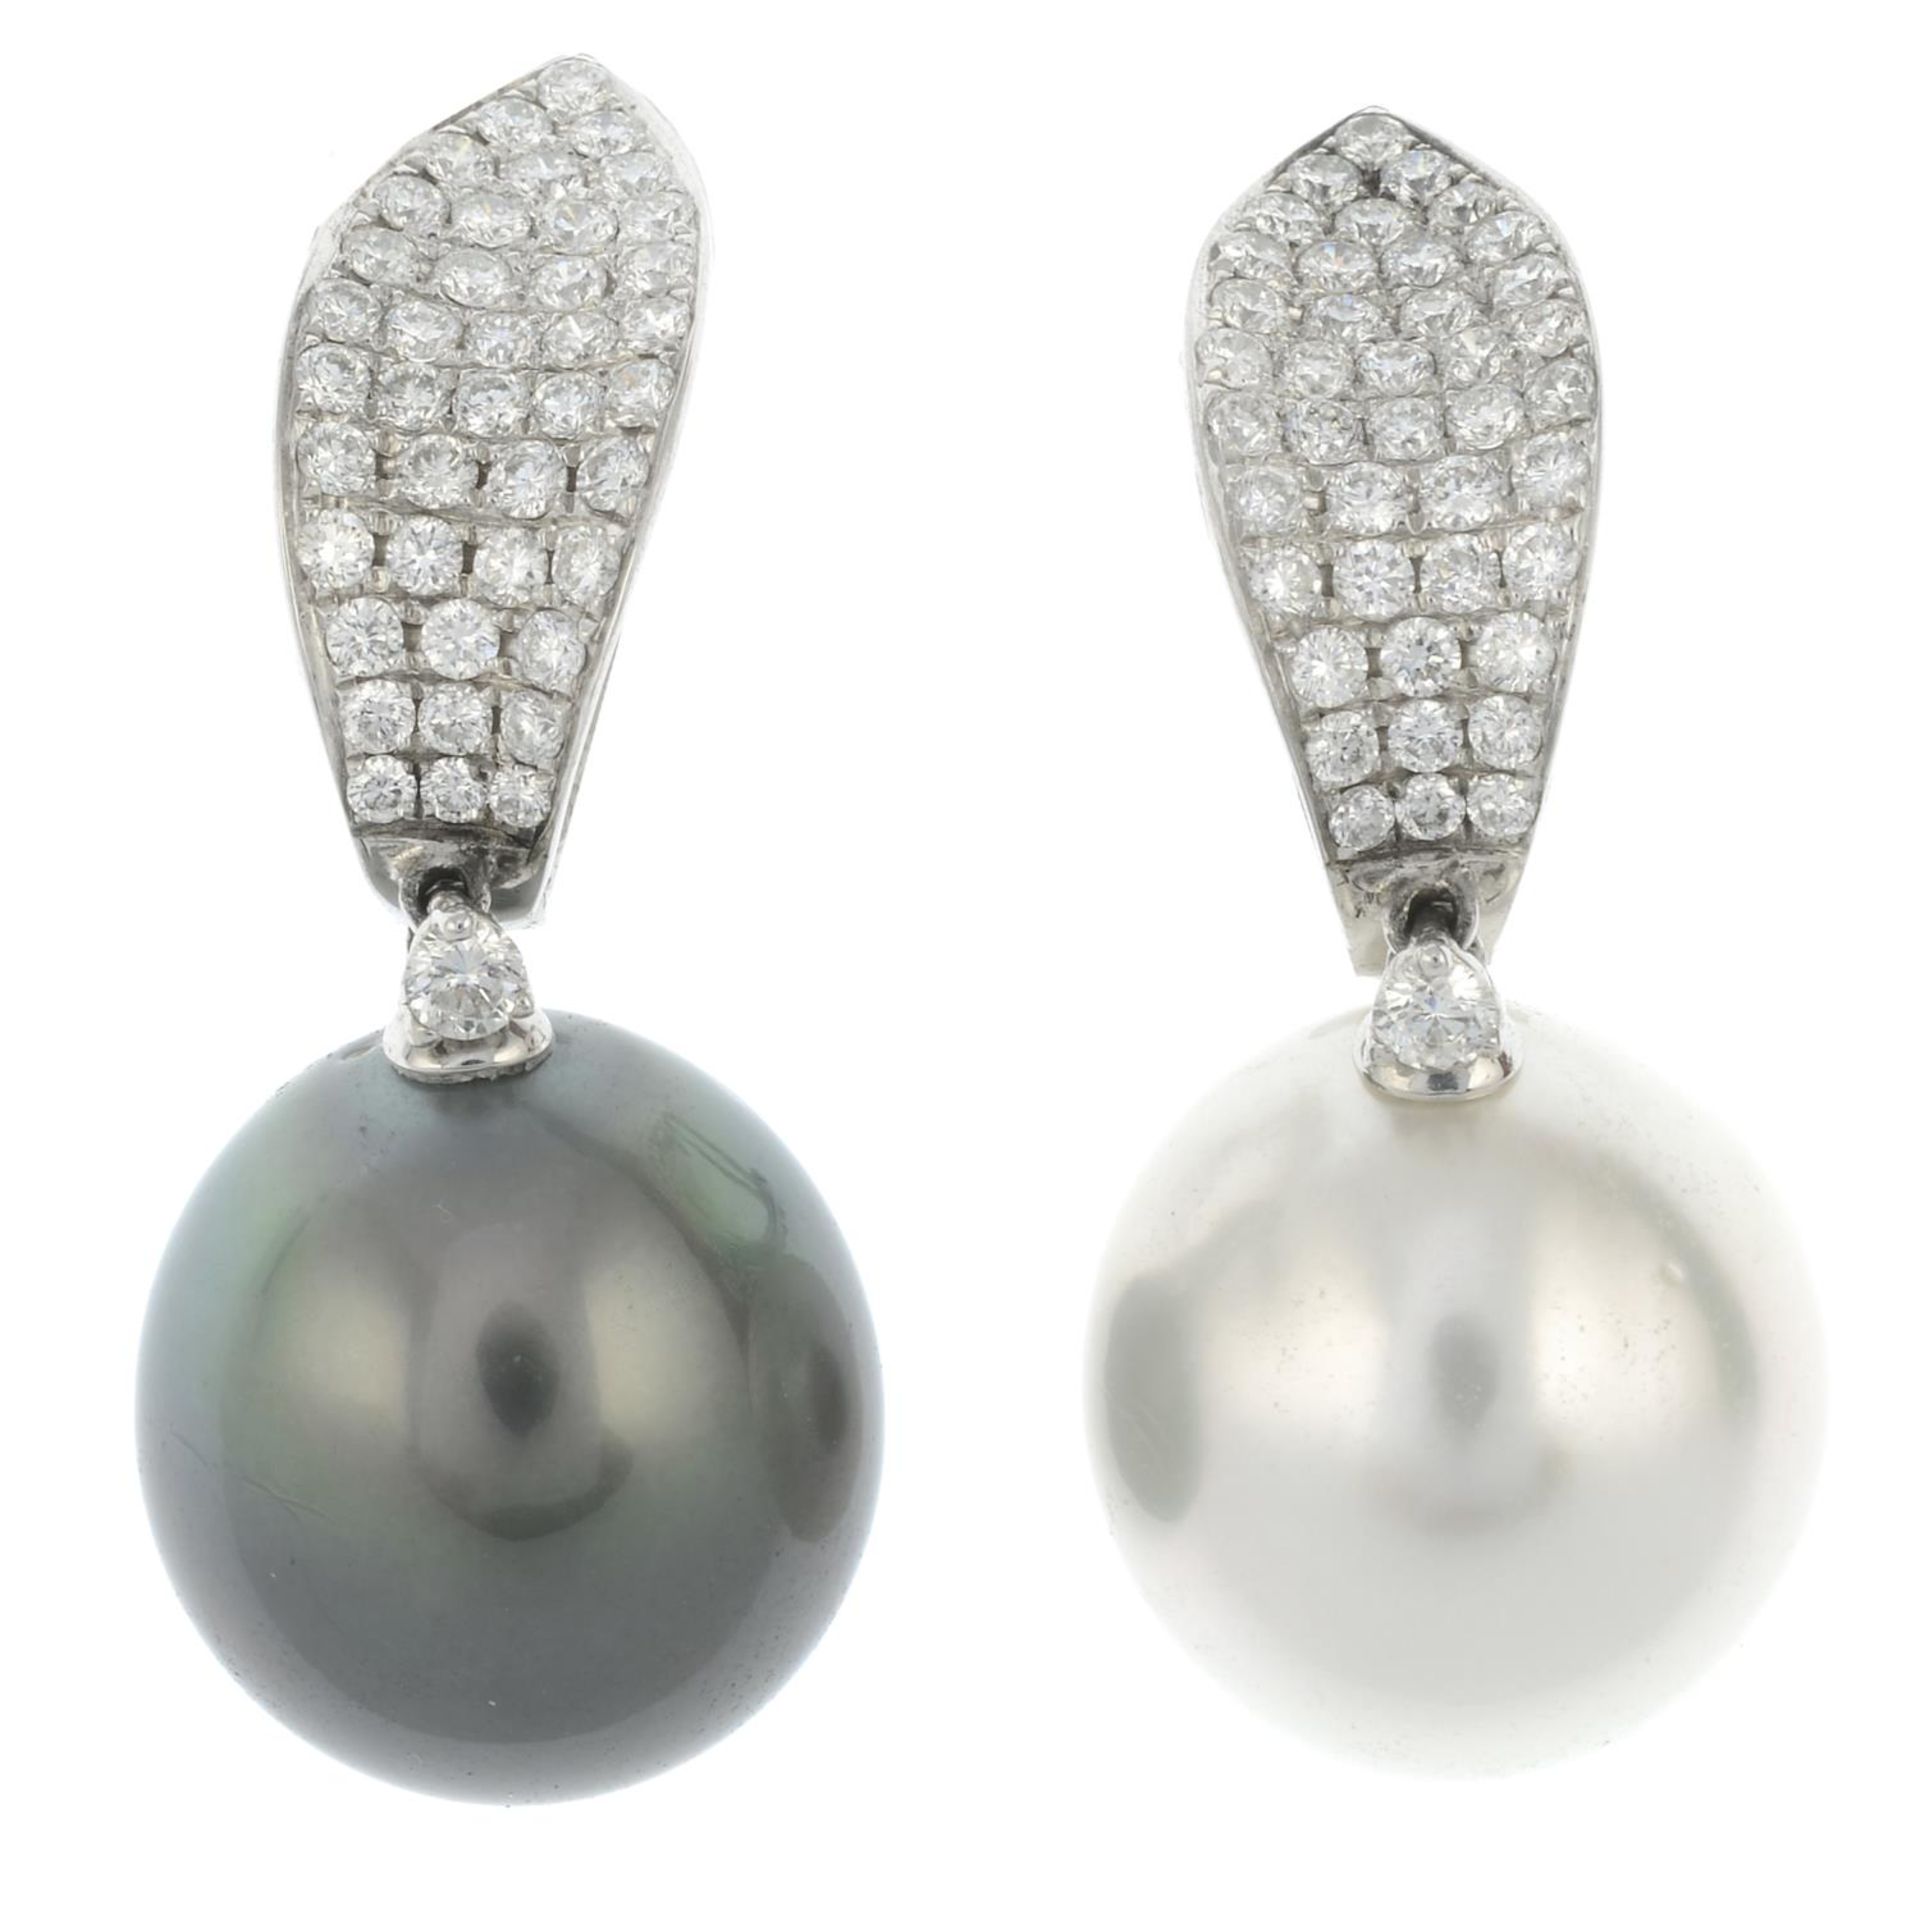 A pair of vari-hue cultured pearl and pave-set diamond earrings.Fittings for non pierced